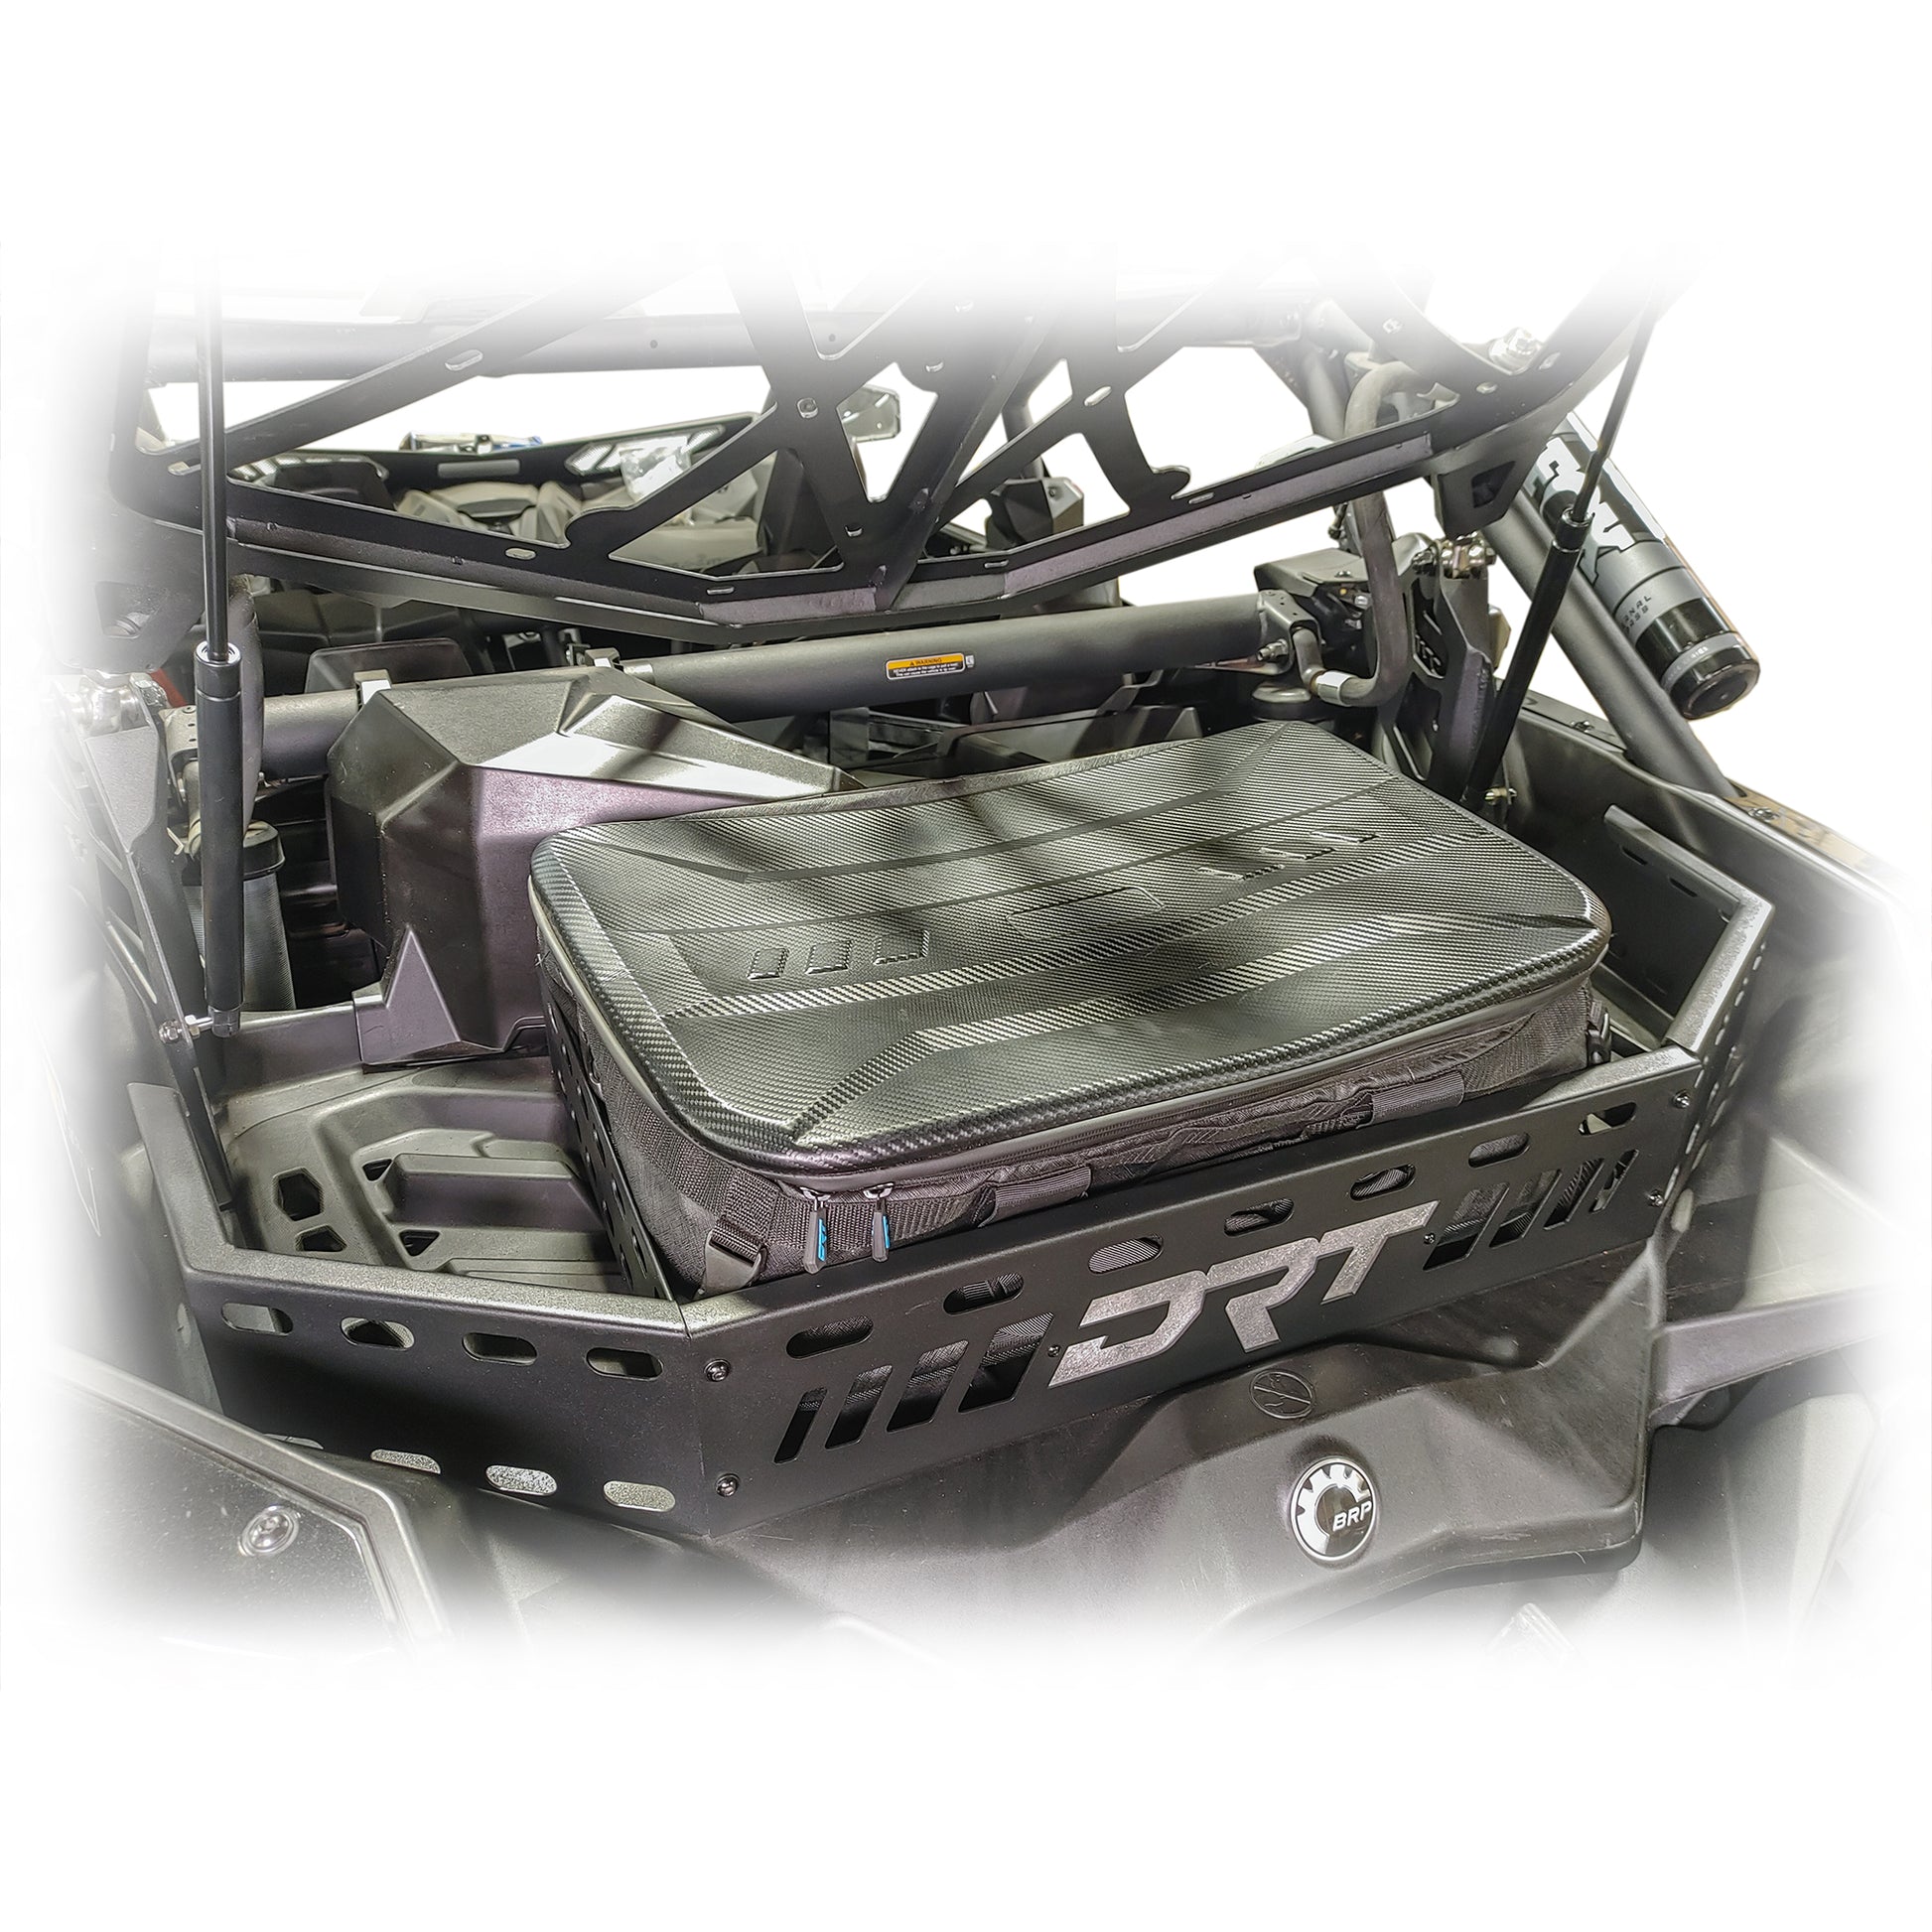 DRT Motorsports Can Am X3 Cargo Storage Rack loaded view #2